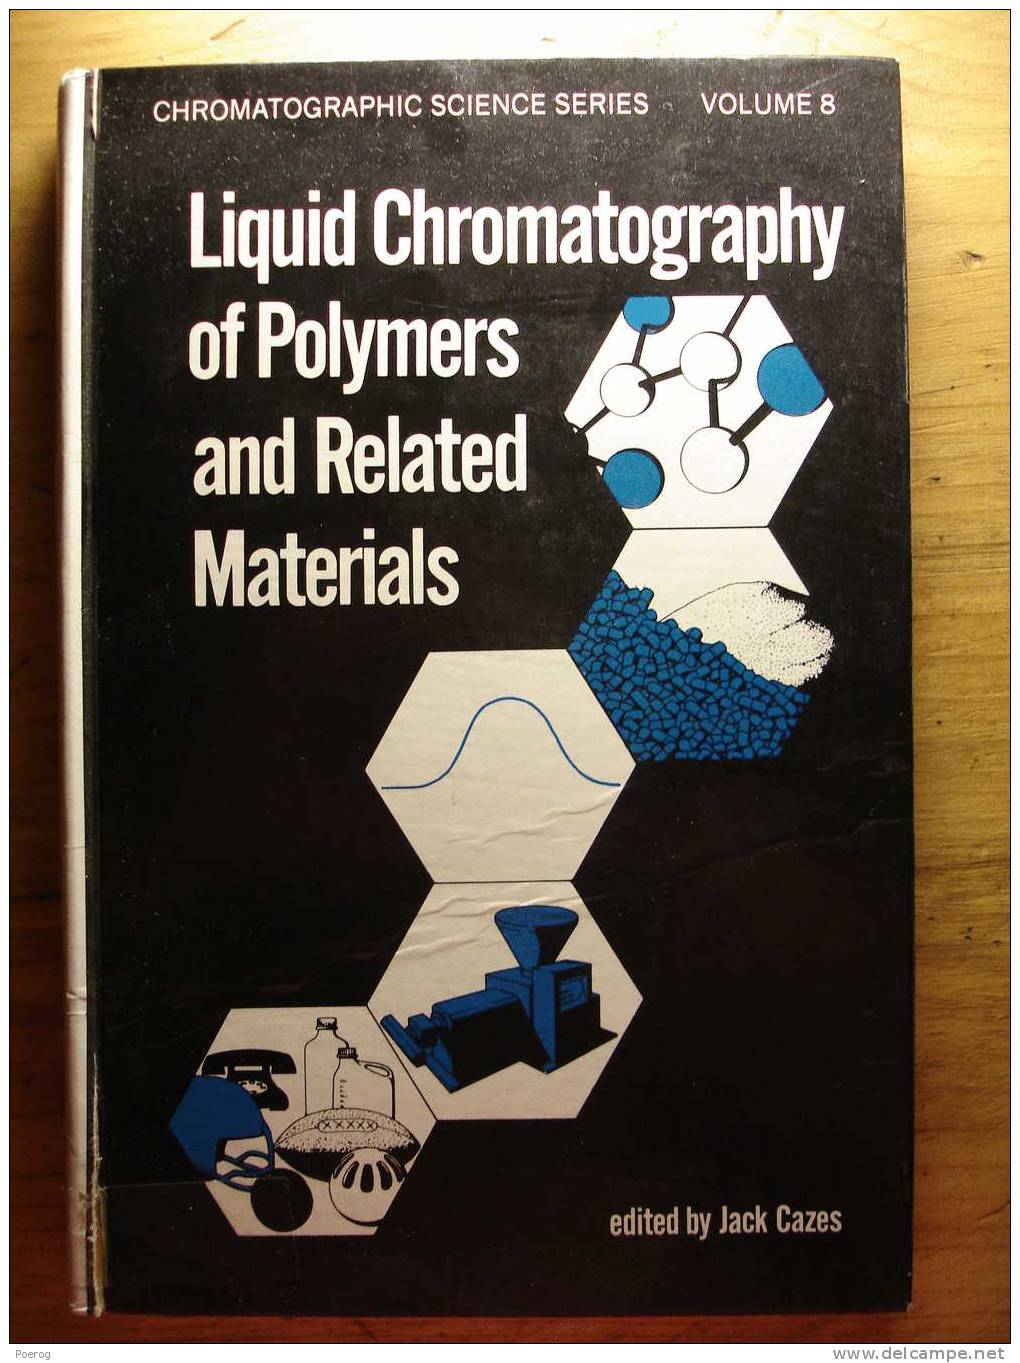 LIQUID CHROMATOGRAPHY OF POLYMERS AND RELATED MATERIALS By JACK CAZES - DEKKER NEW YORK 1977 - Scheikunde